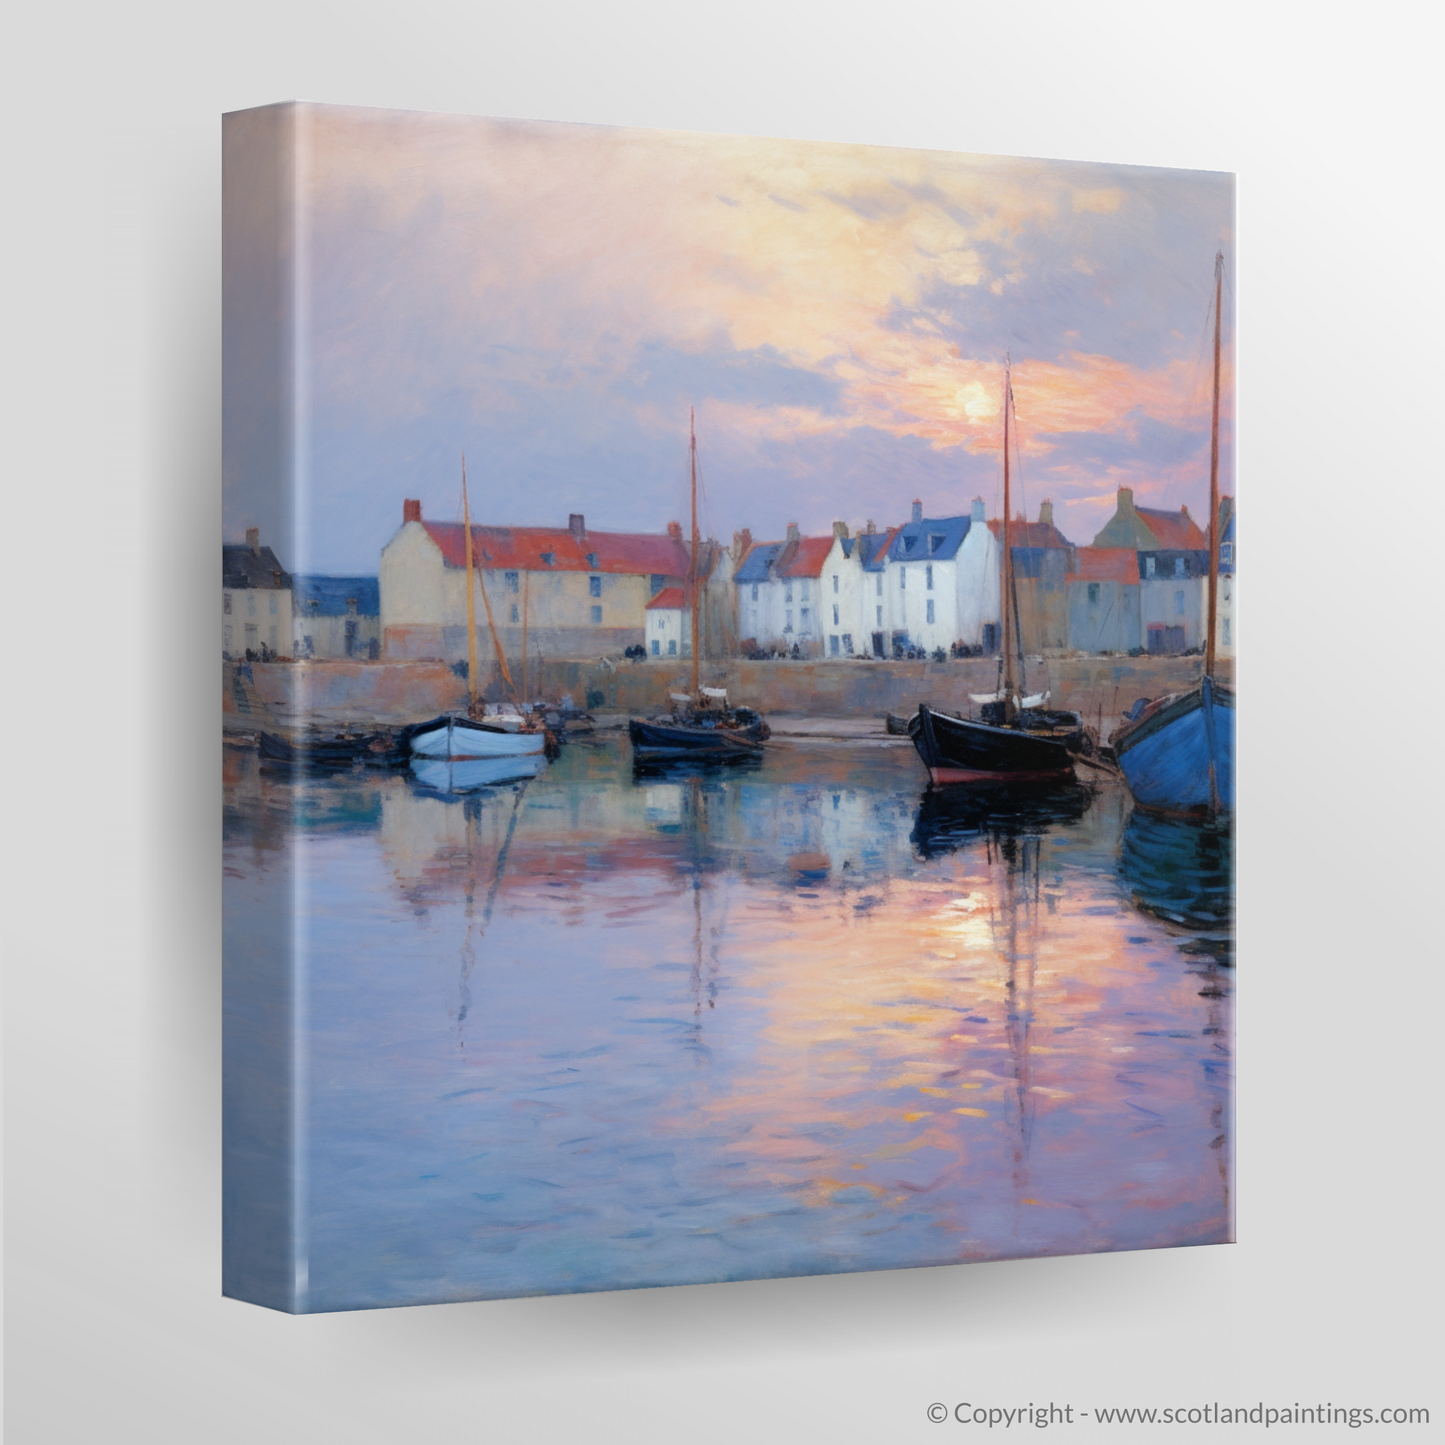 Dusk at Pittenweem Harbour: An Impressionistic Ode to Scottish Serenity